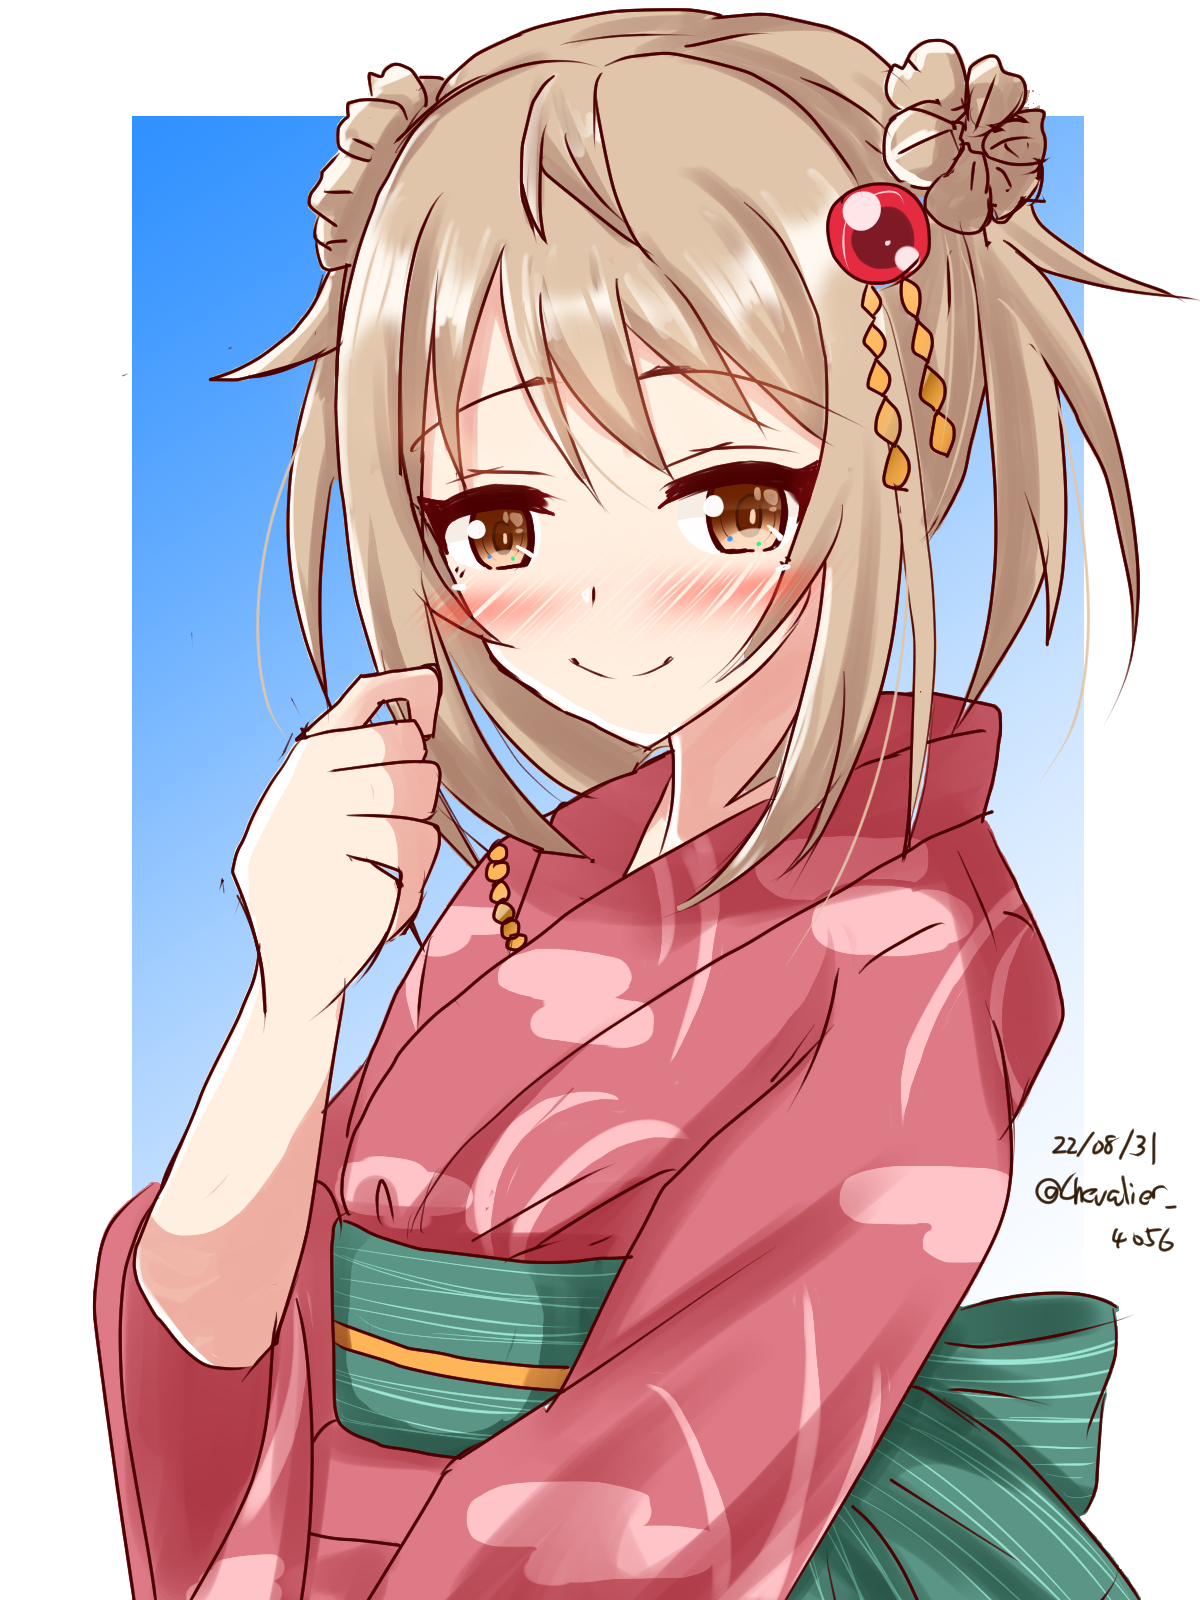 Anime 1200x1600 anime anime girls Kantai Collection Michishio (KanColle) twintails brunette solo artwork digital art fan art face smiling traditional clothing shoulder length hair 2022 (year) watermarked looking at viewer